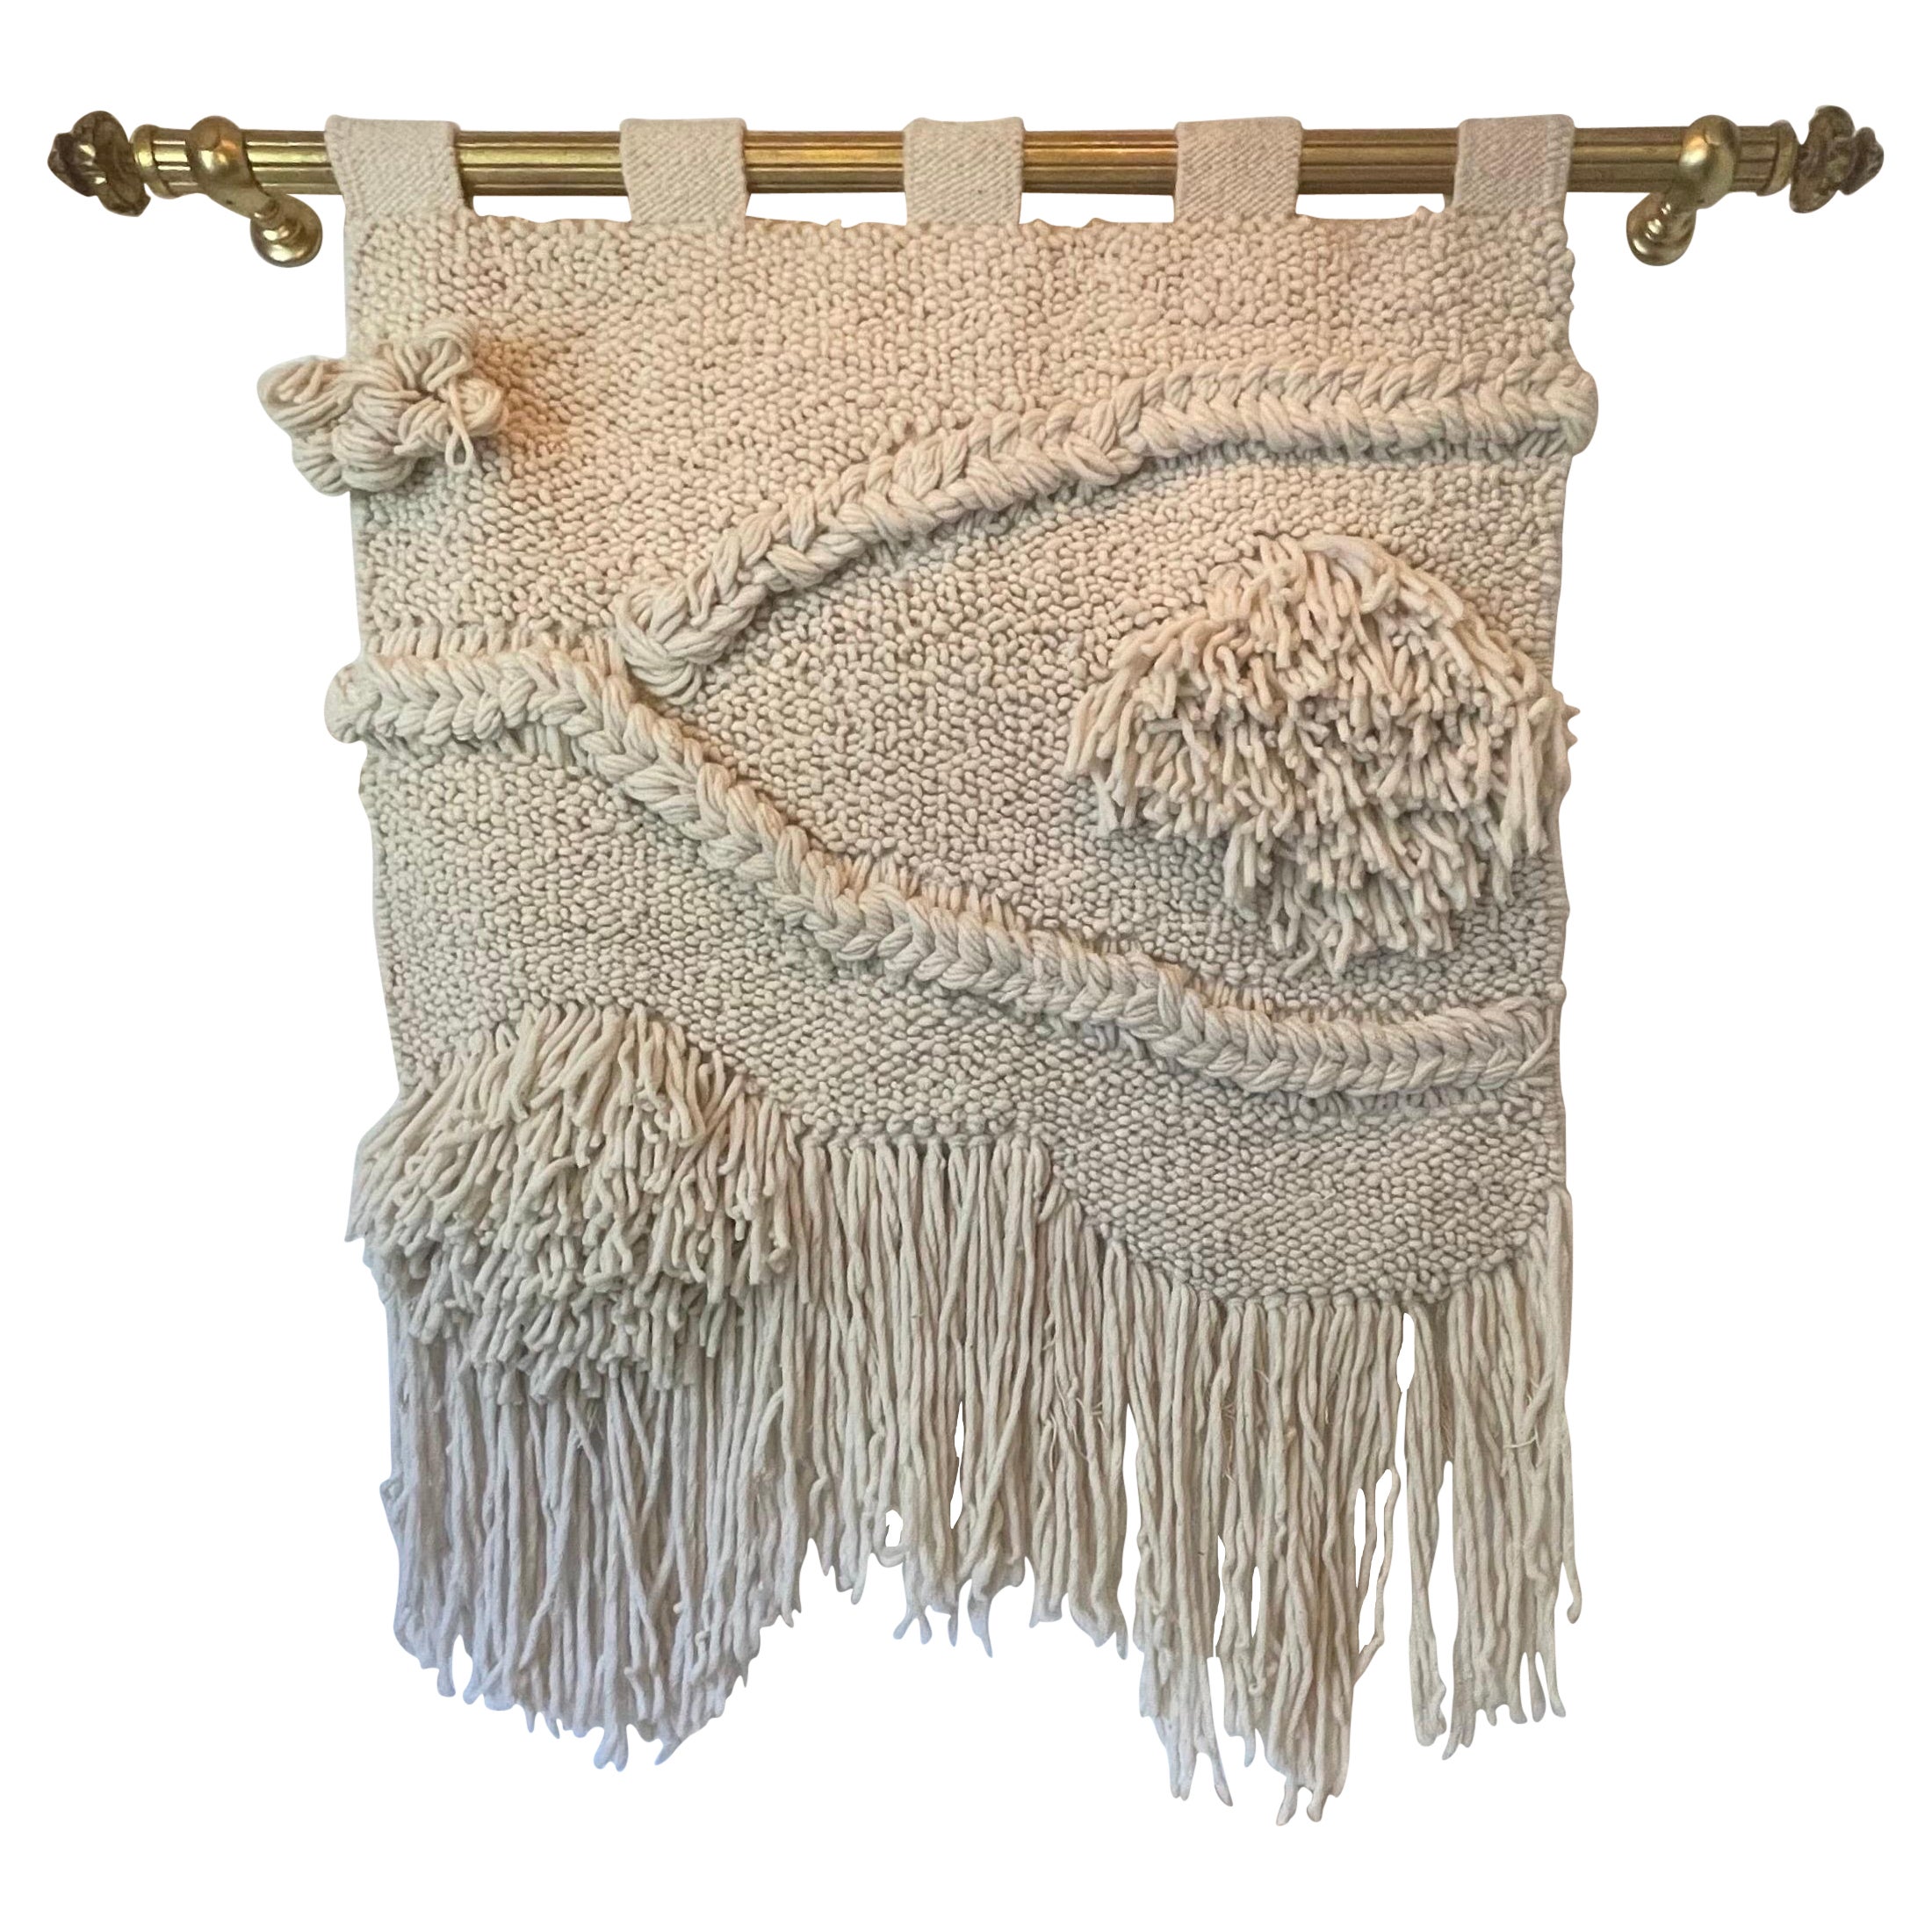 100% Natural Handwoven Wool Tapestry/ Wall Art For Sale